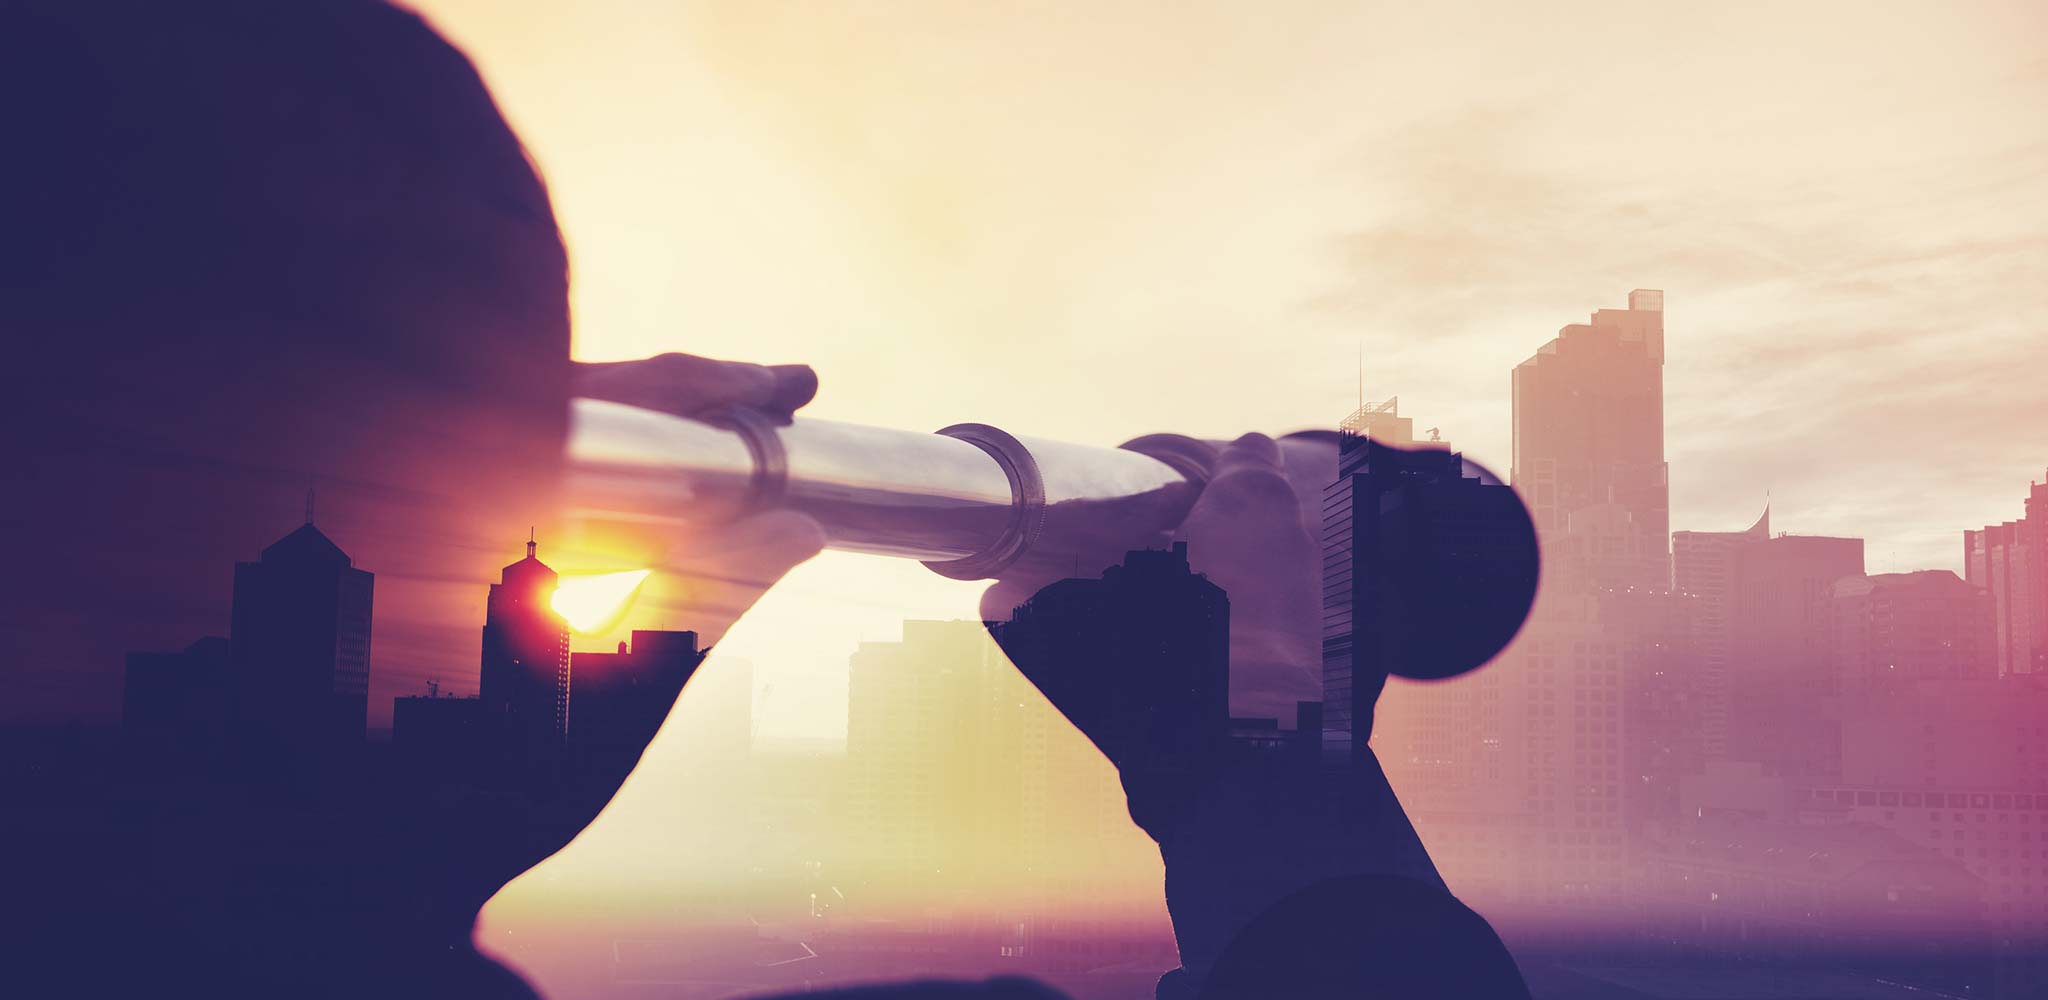 Artistic Image Person Holding And Looking Through Telescope At City Business Buildings During Beautiful Sunset Skyline